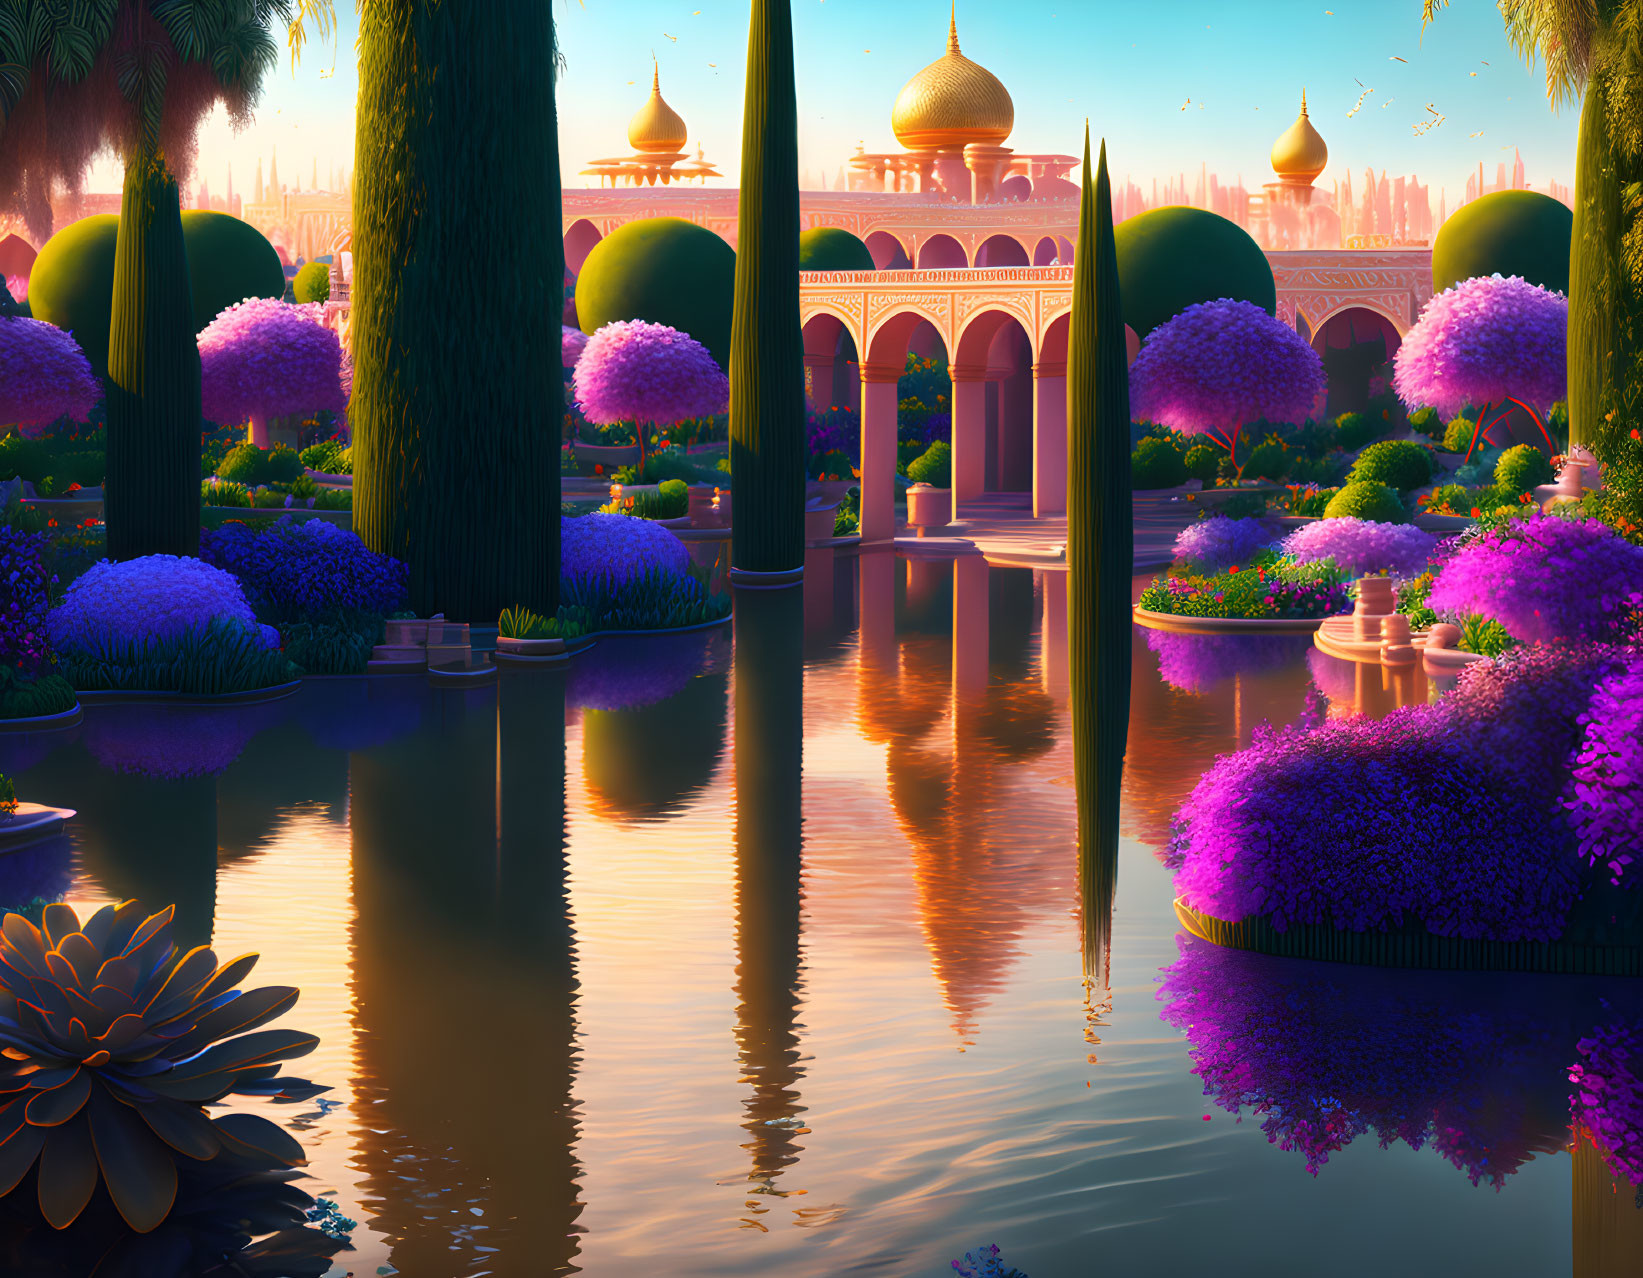 Fantasy garden with purple foliage, water features, and domed structures